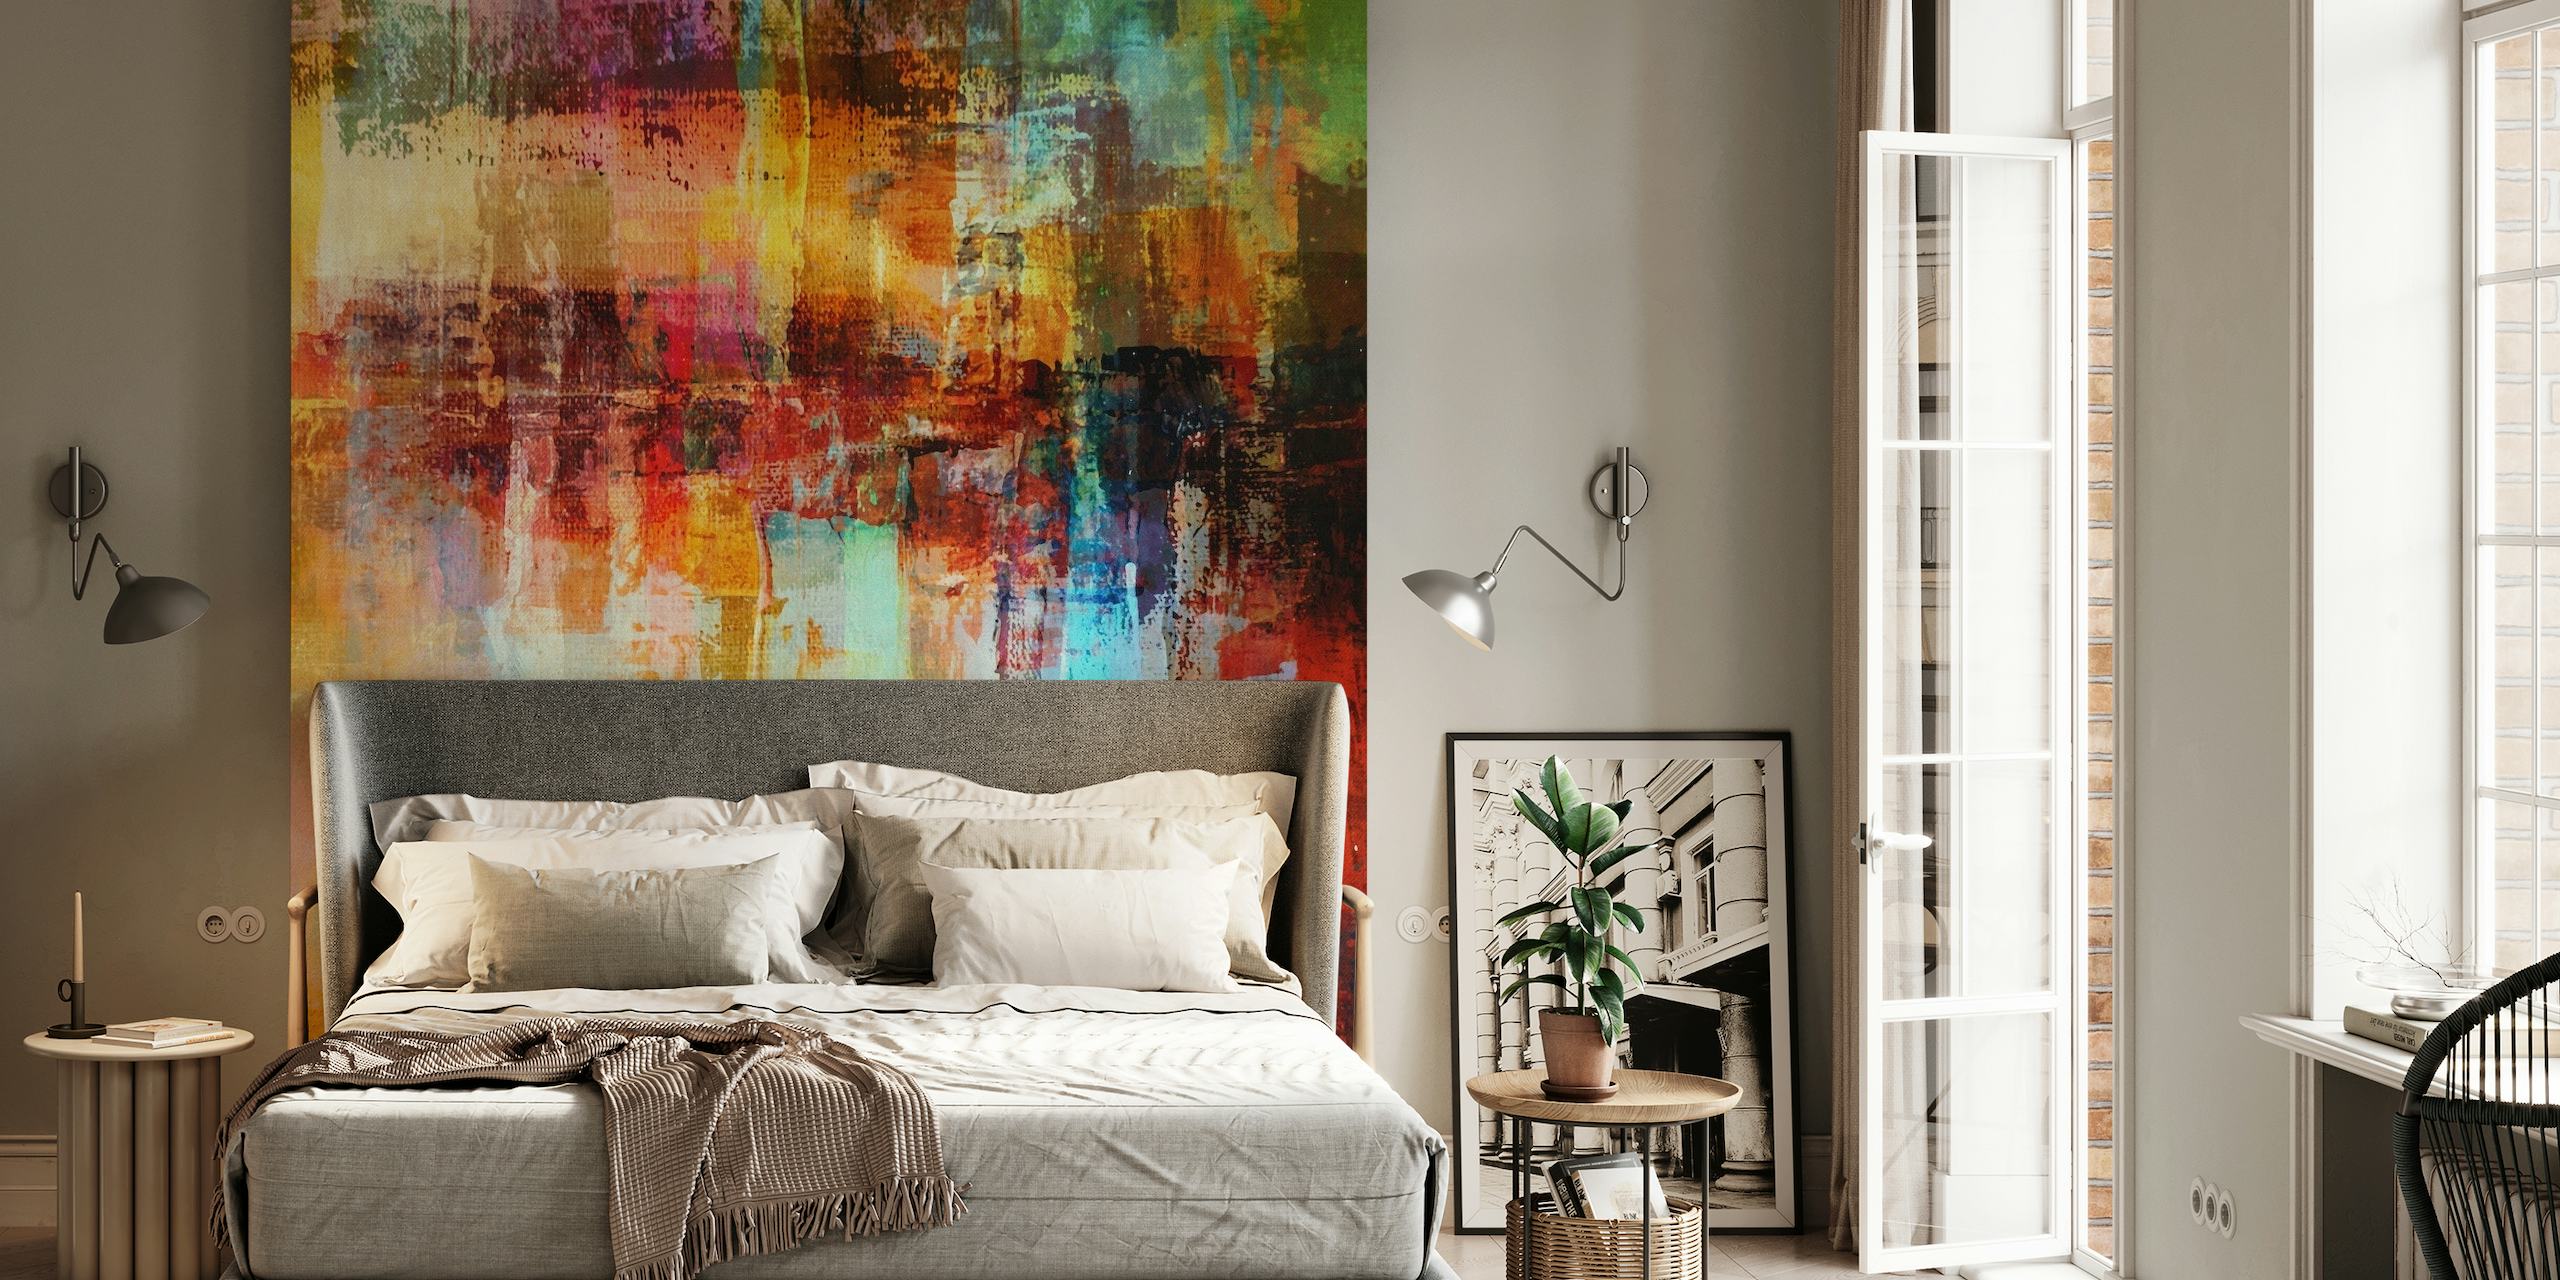 Abstract urban landscape wall mural with a fusion of warm and cool tones